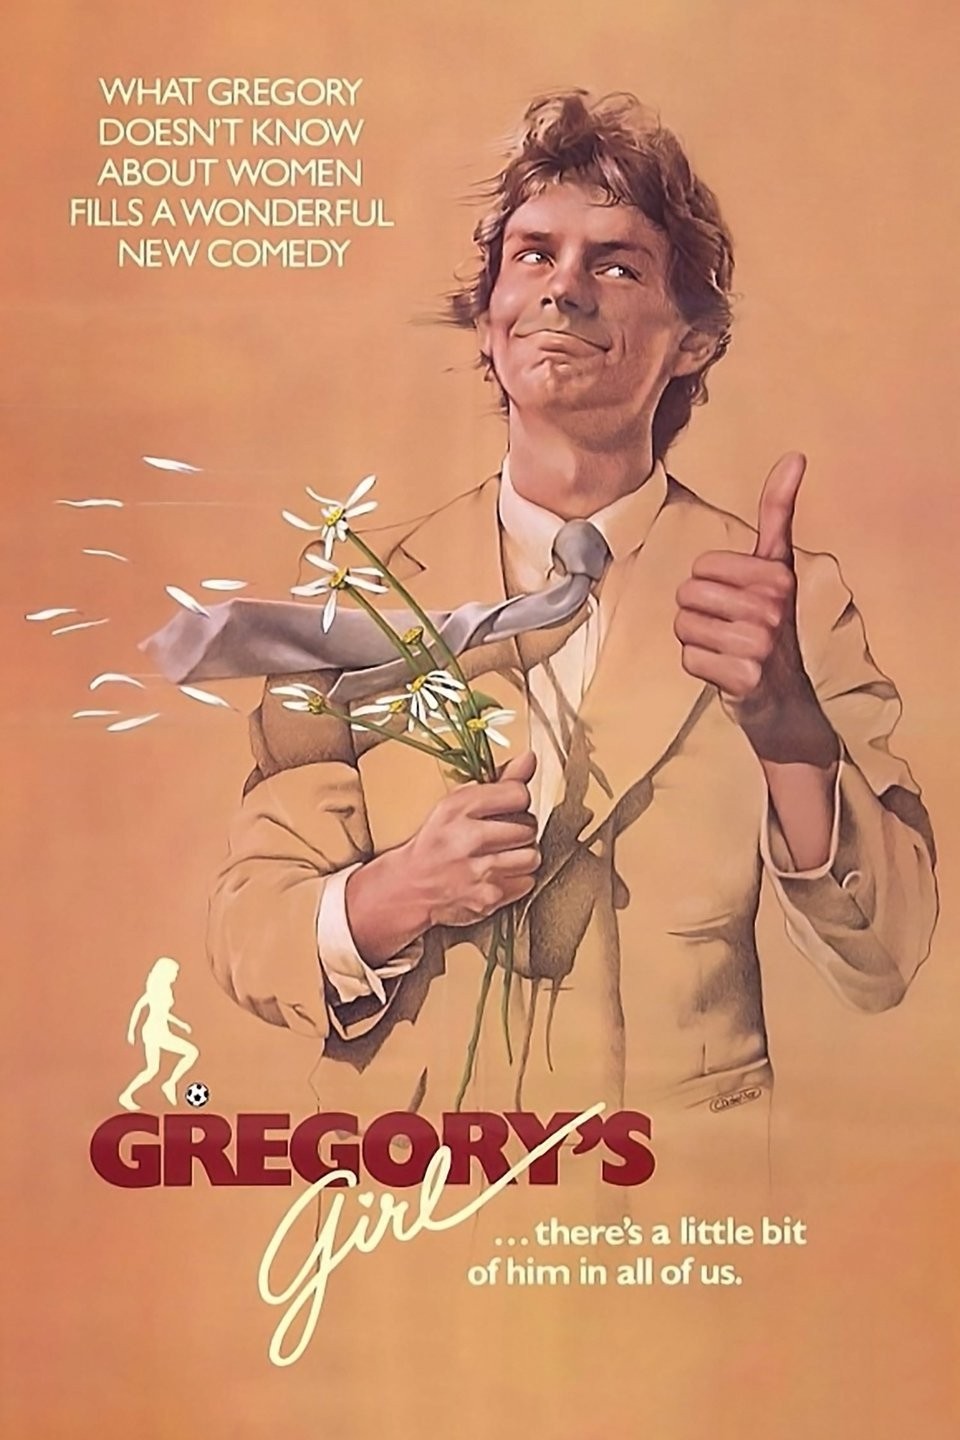 GREGORY'S STORY: Who is Greogry?